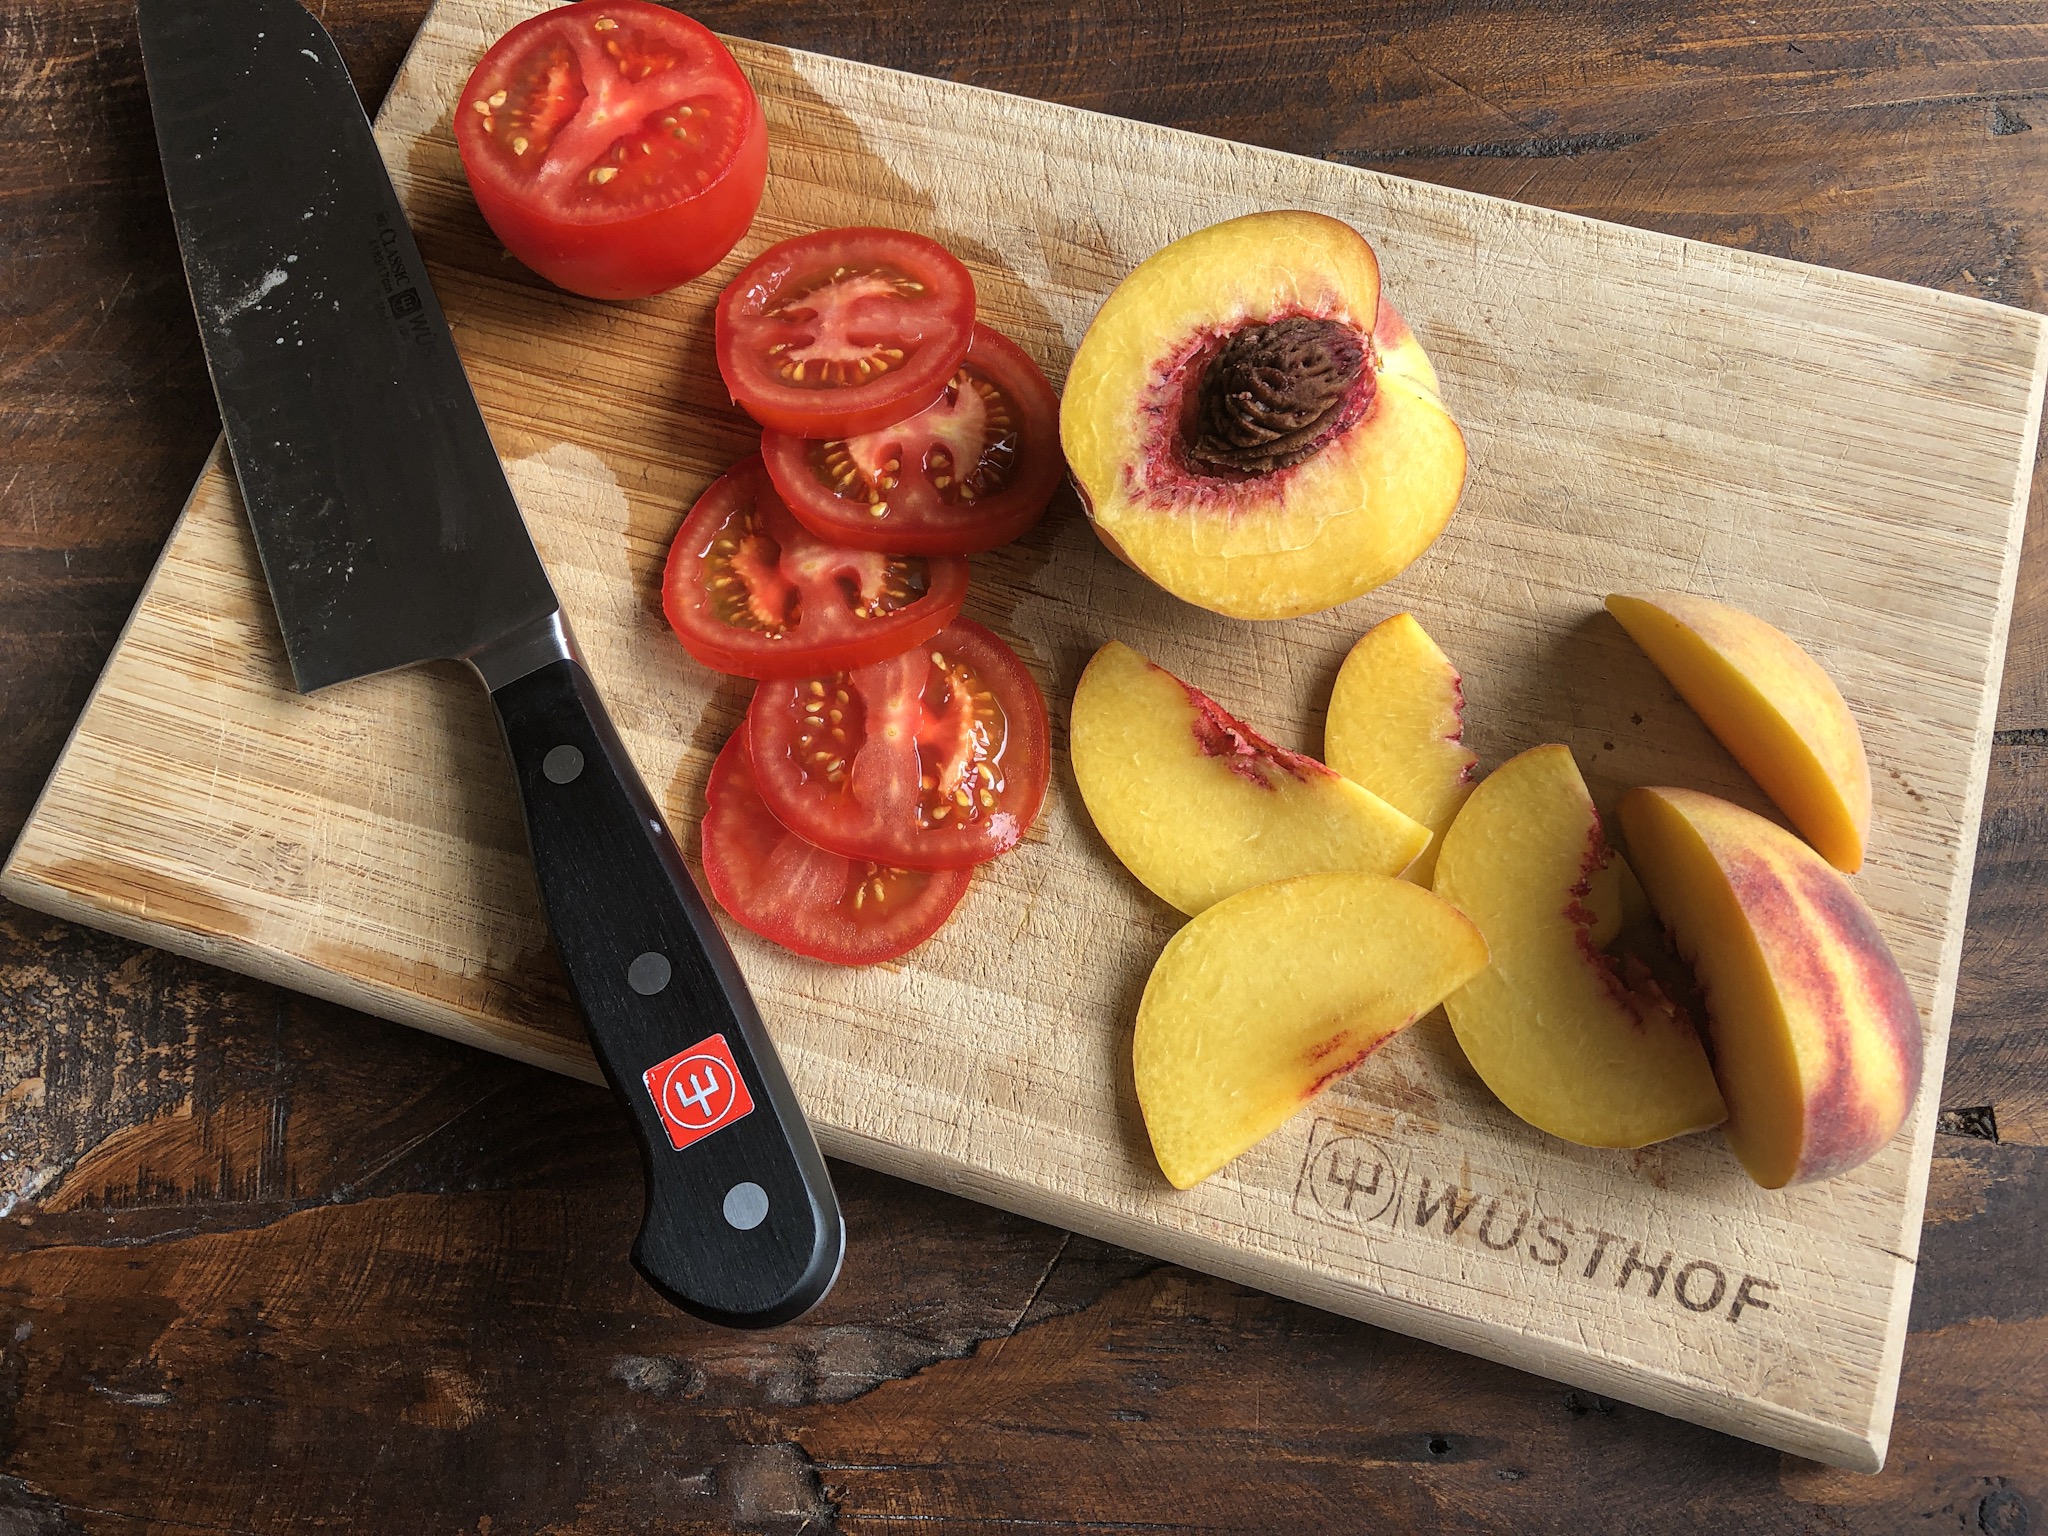 Example of how the Tomatoes and Peaches should be sliced